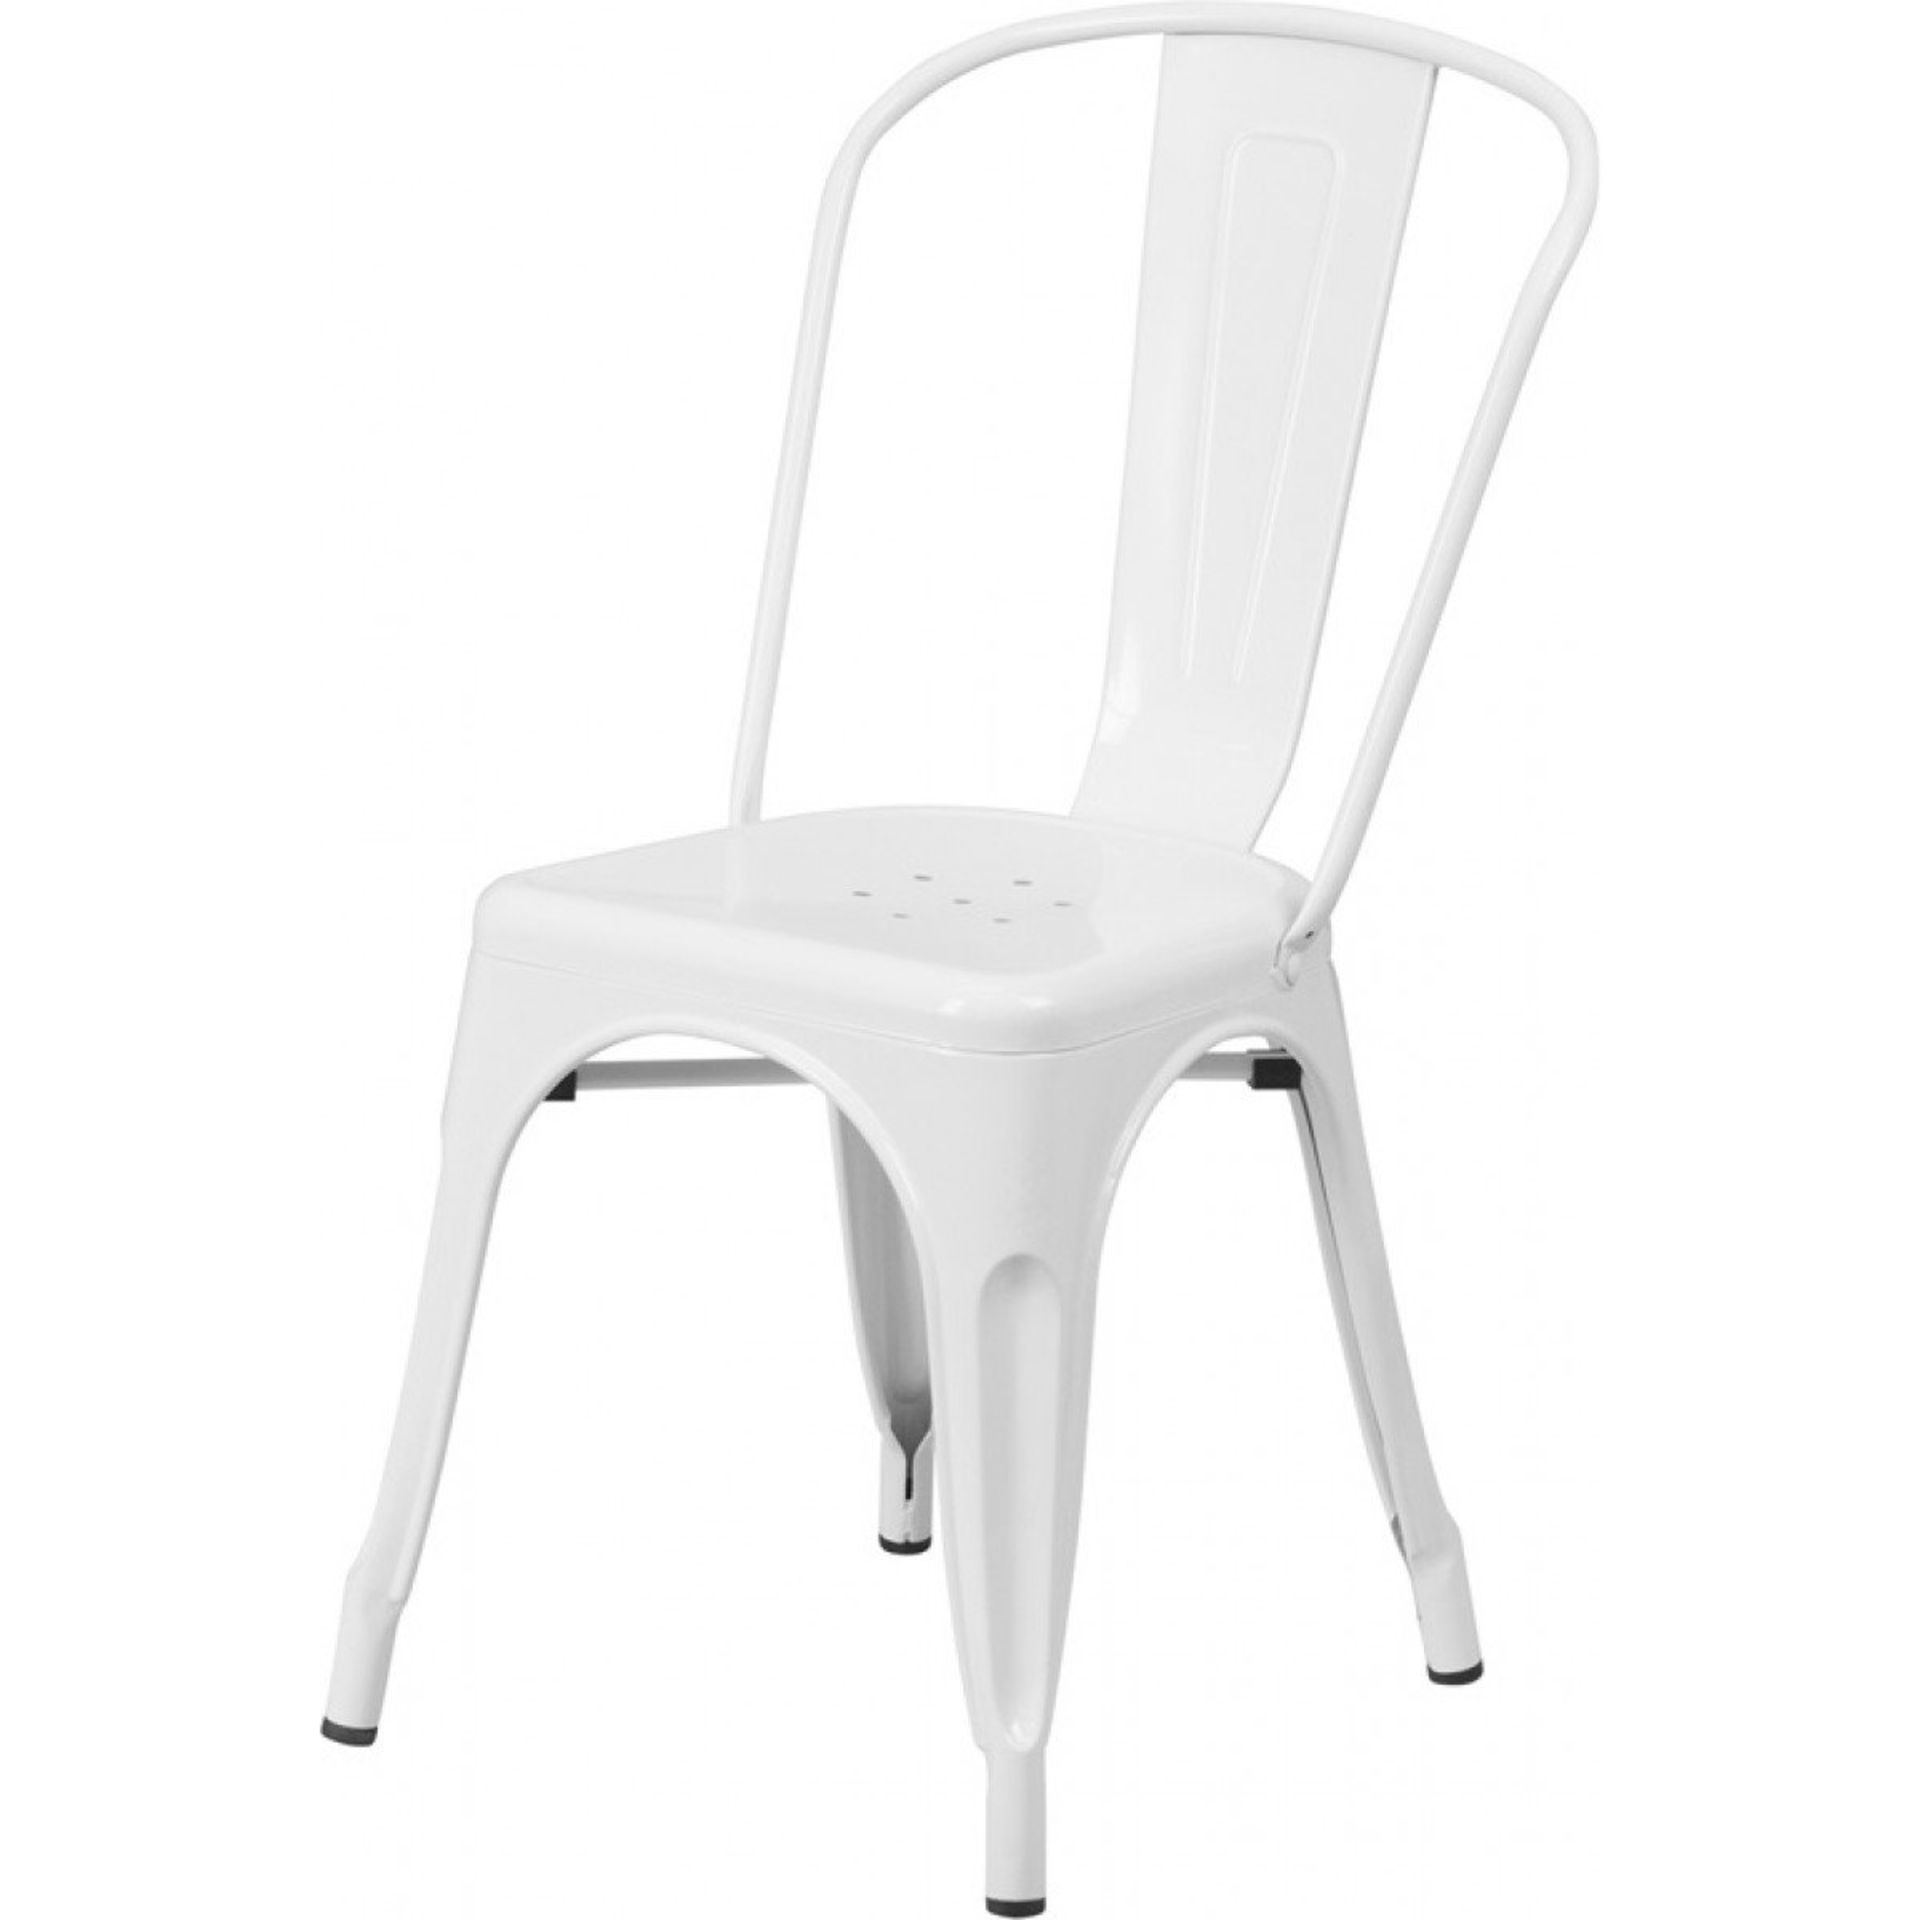 1 x Tolix Industrial Style Outdoor Bistro Table and Chair Set in White- Includes 1 x Table and 4 x - Image 6 of 12